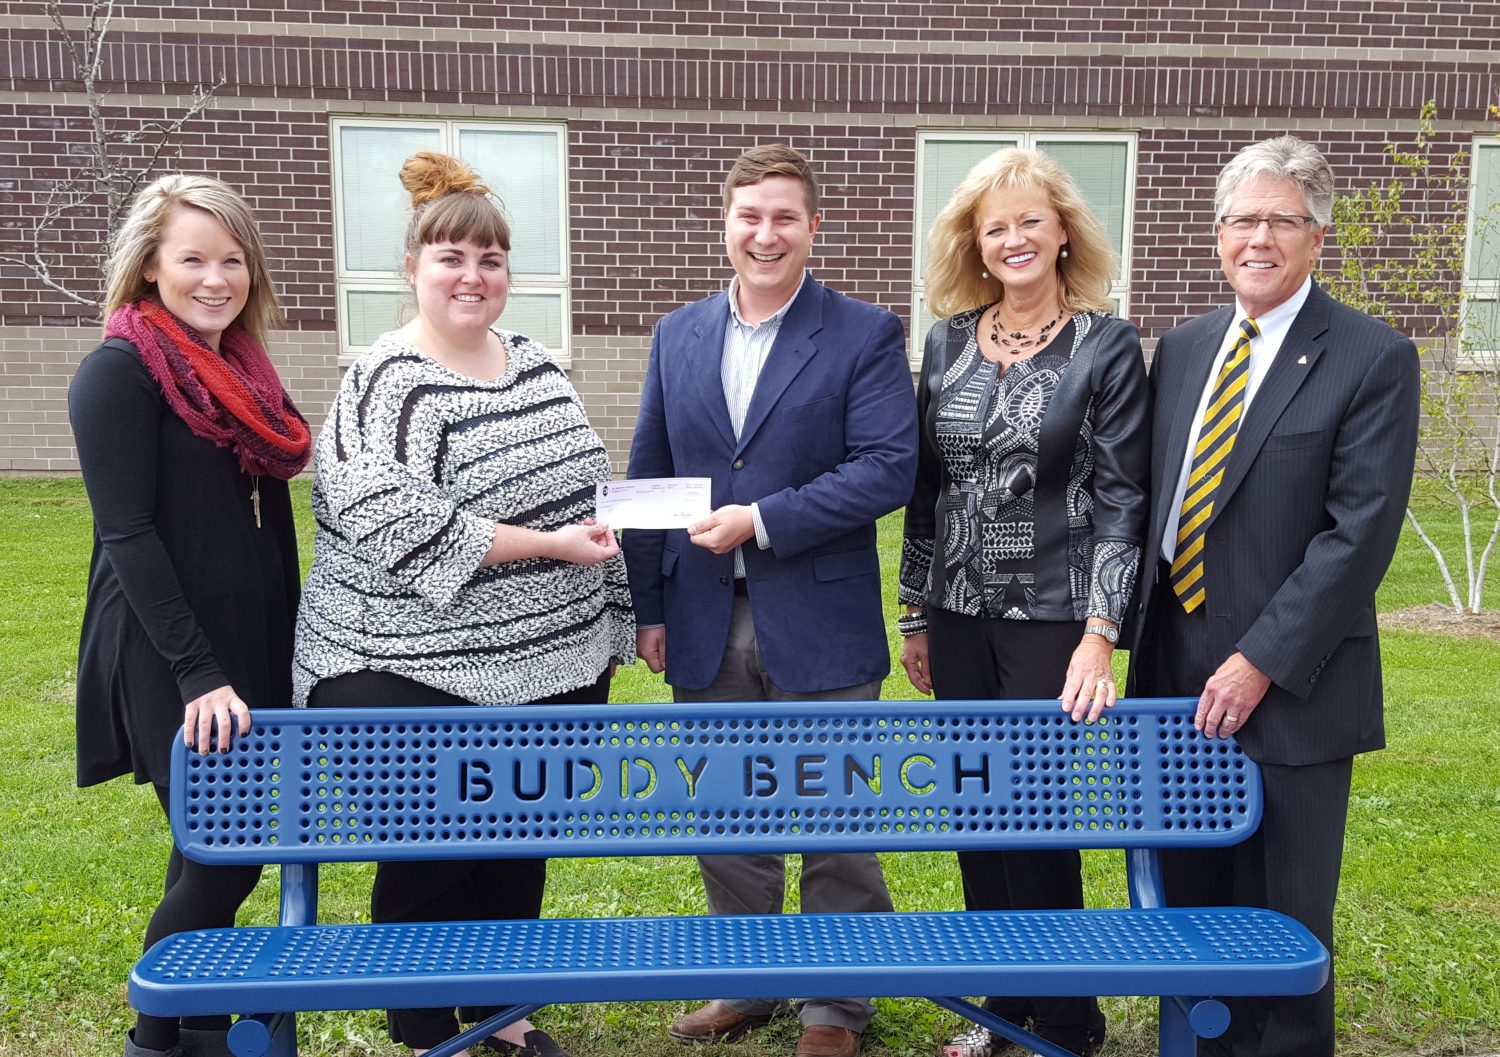 From left: Renee Binder, Miranda Gregory, Kyle Weik, Cindy Burns, and Dan Burns pose with an IMT Community Contest-winning Buddy Bench.